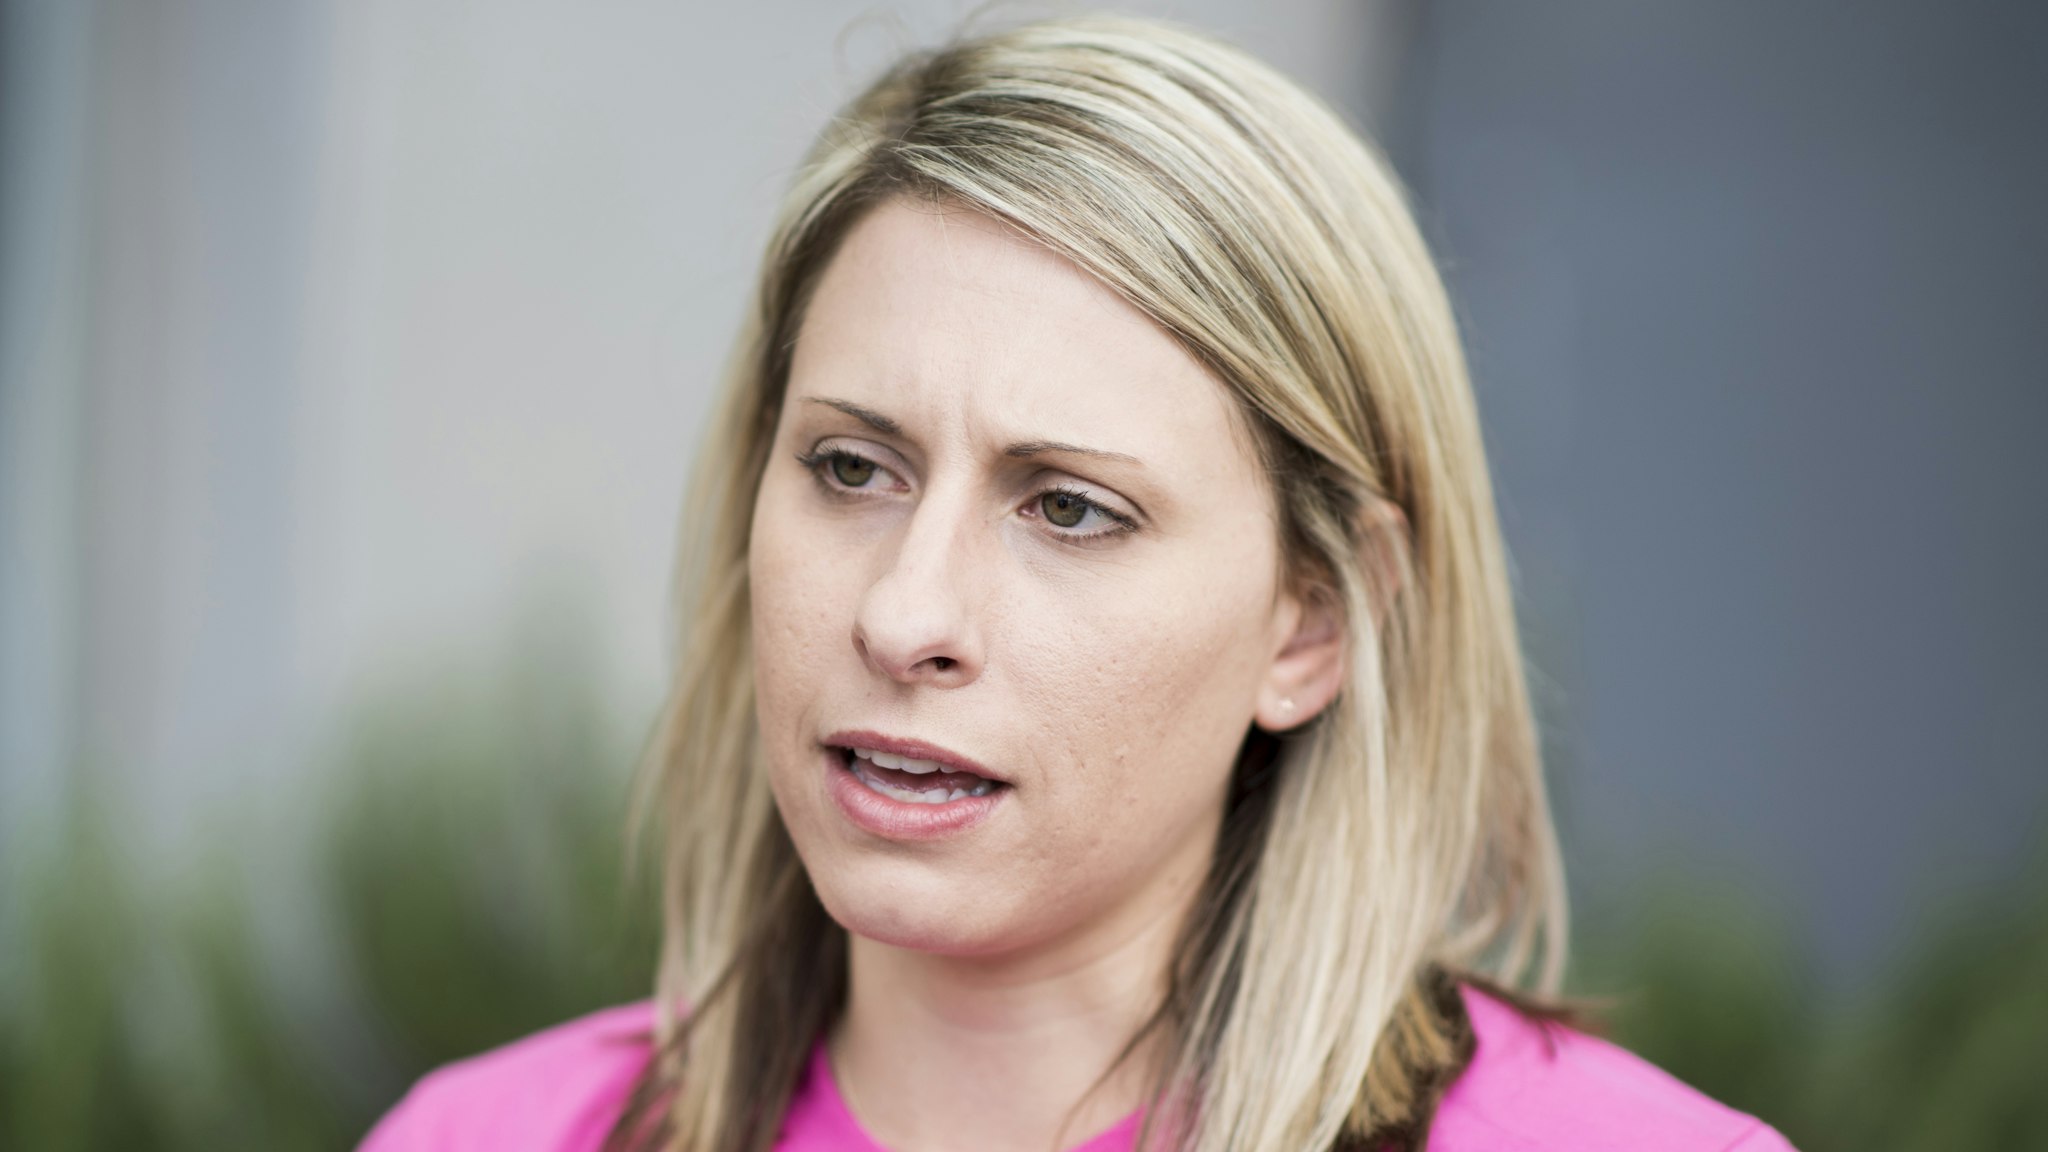 Katie Hill, Democrat running for California's 25th Congressional district seat in Congress, attends the opening of the SCV Democratic Headquarters for 2018 in Newhall, Calif., on Saturday, May 26, 2018. California is holding its primary election on June 5, 2018.